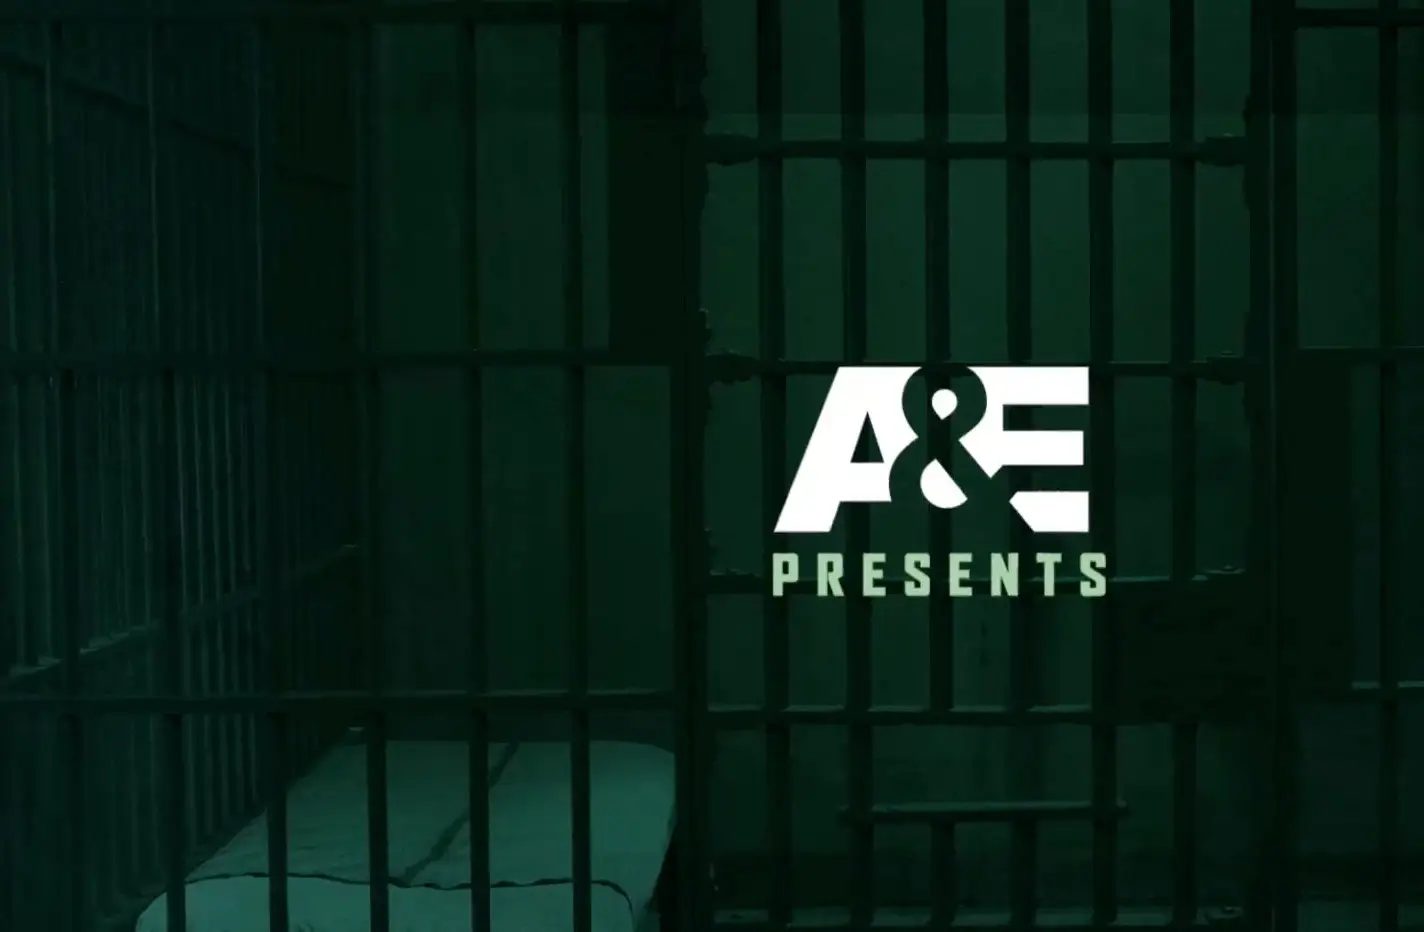 A dimly lit prison cell with a cot, viewed through bars, featuring the logo "a&e presents" in a Sales Content Library.